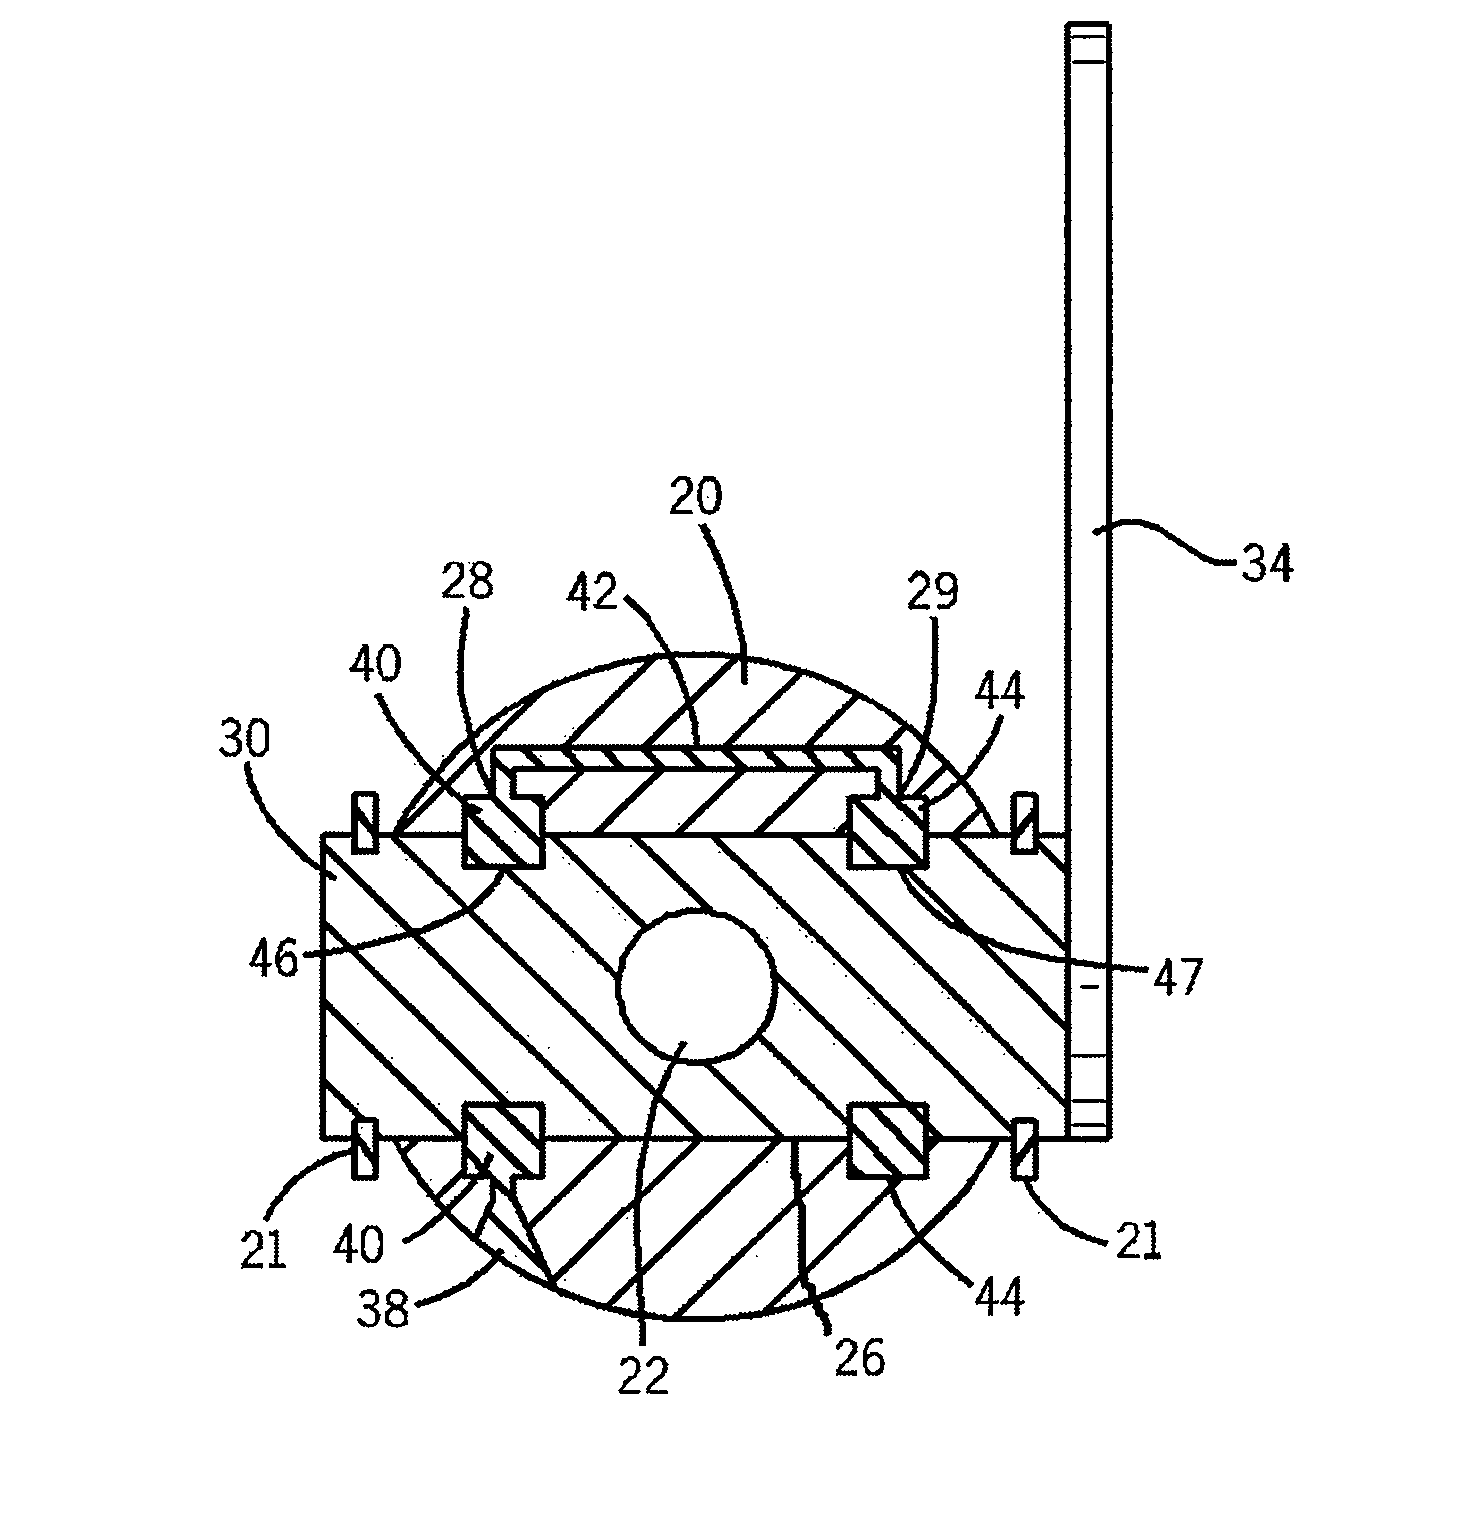 Nozzle shutoff for an injection molding machine